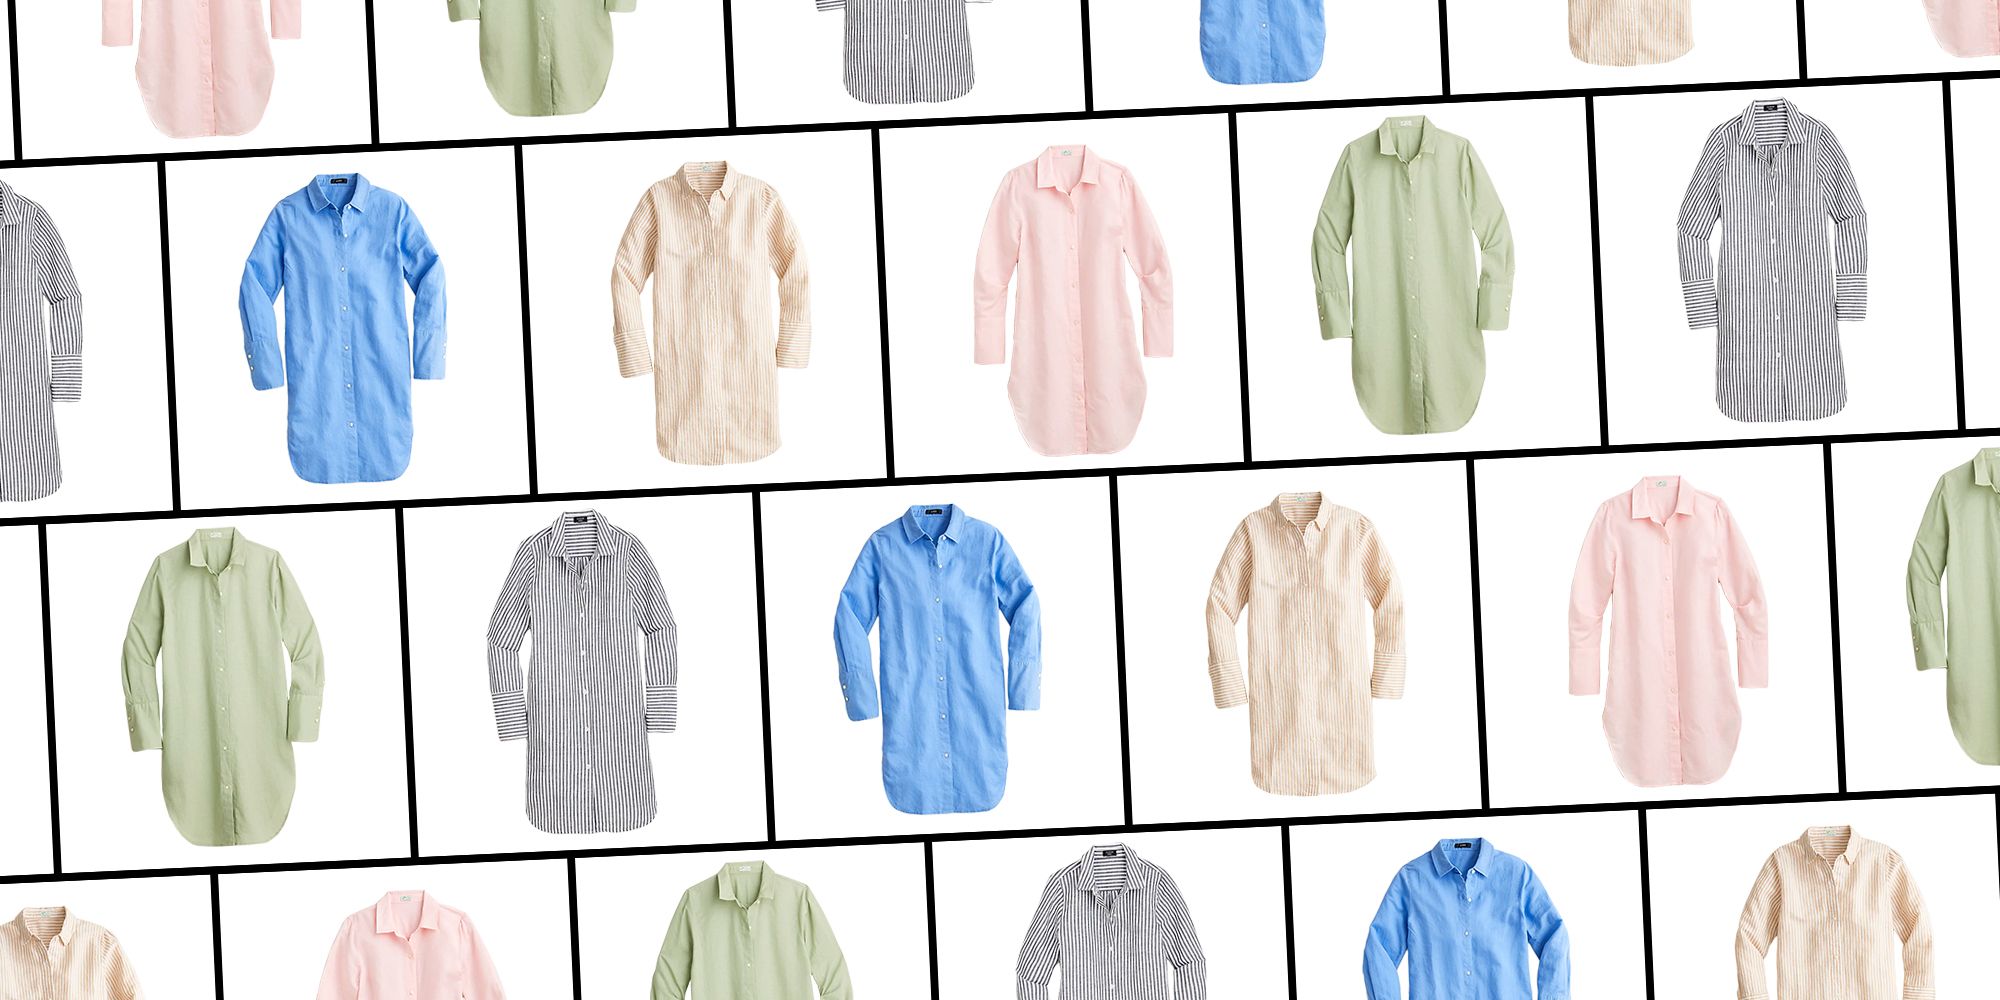 Why Don't You Buy: The J. Crew Beach Shirt